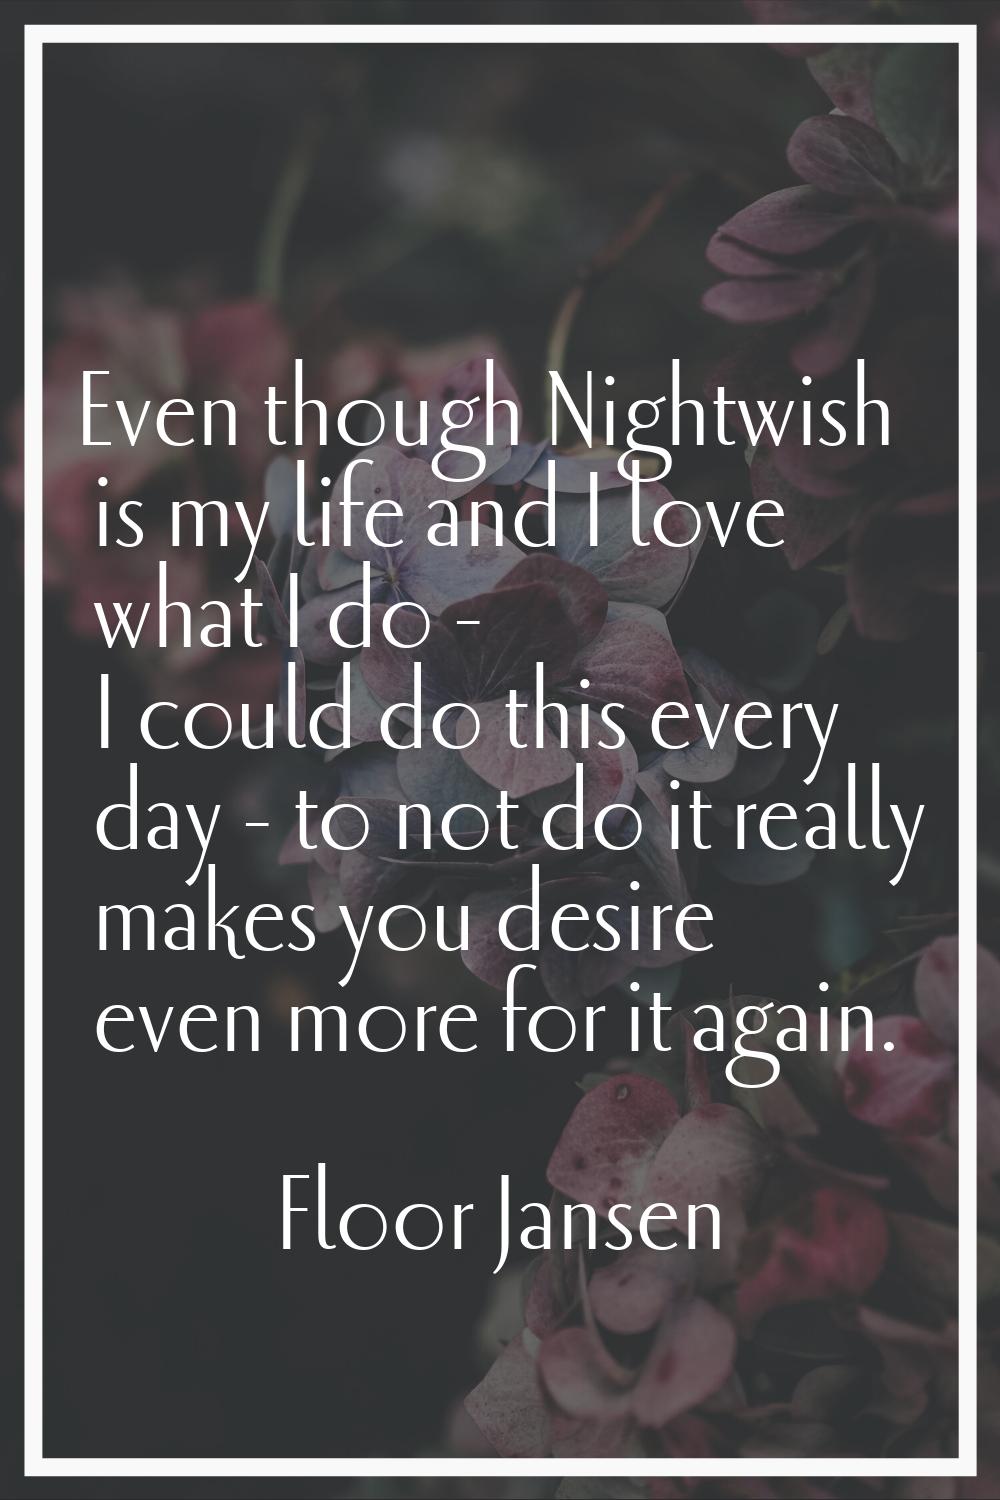 Even though Nightwish is my life and I love what I do - I could do this every day - to not do it re